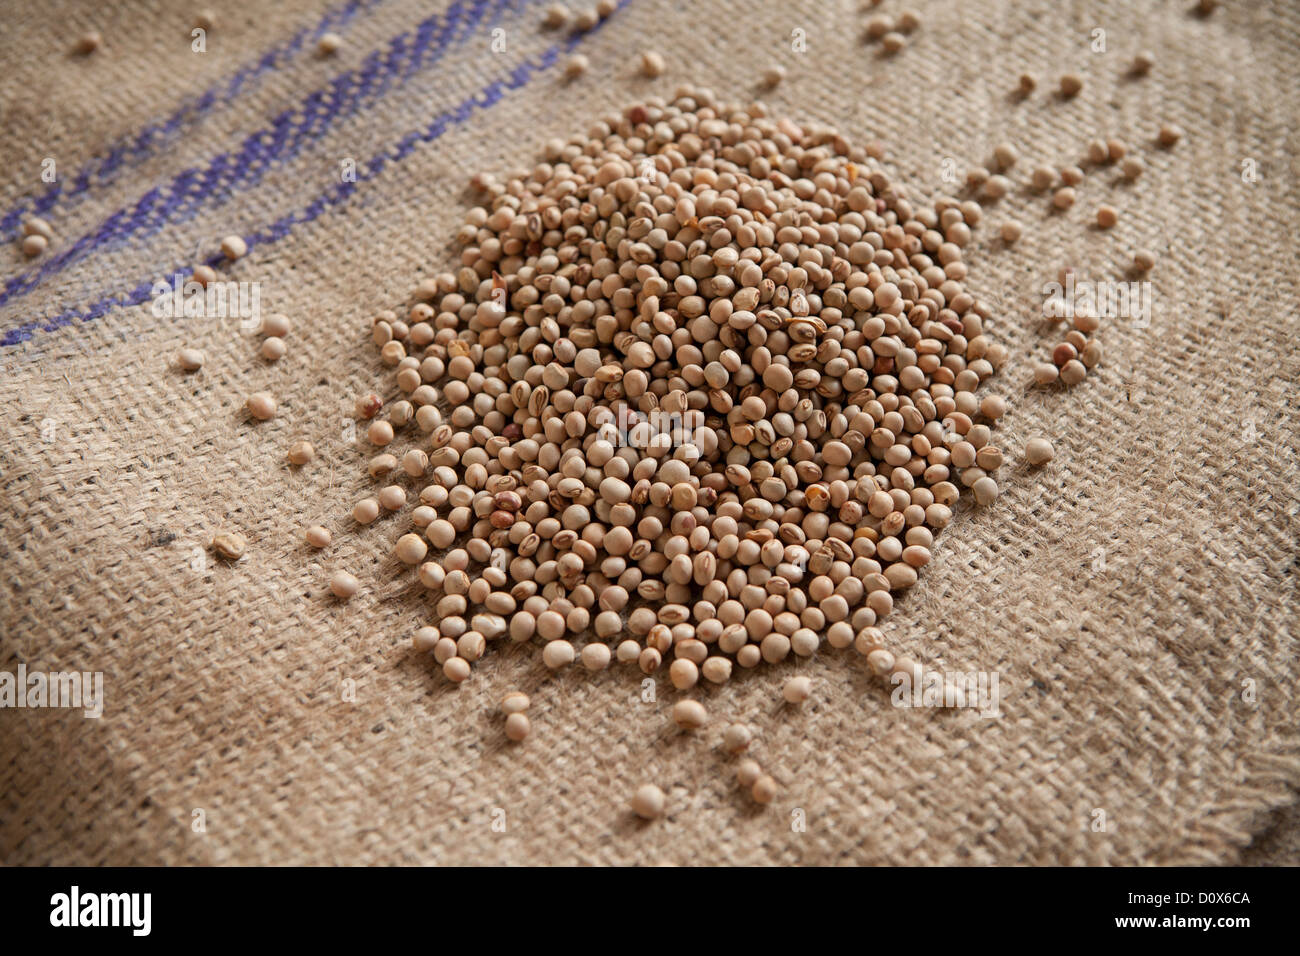 Pigeon peas (lentils or pulses) at a commodities warehouse in Dar es Salaam, Tanzania, East Africa. Stock Photo